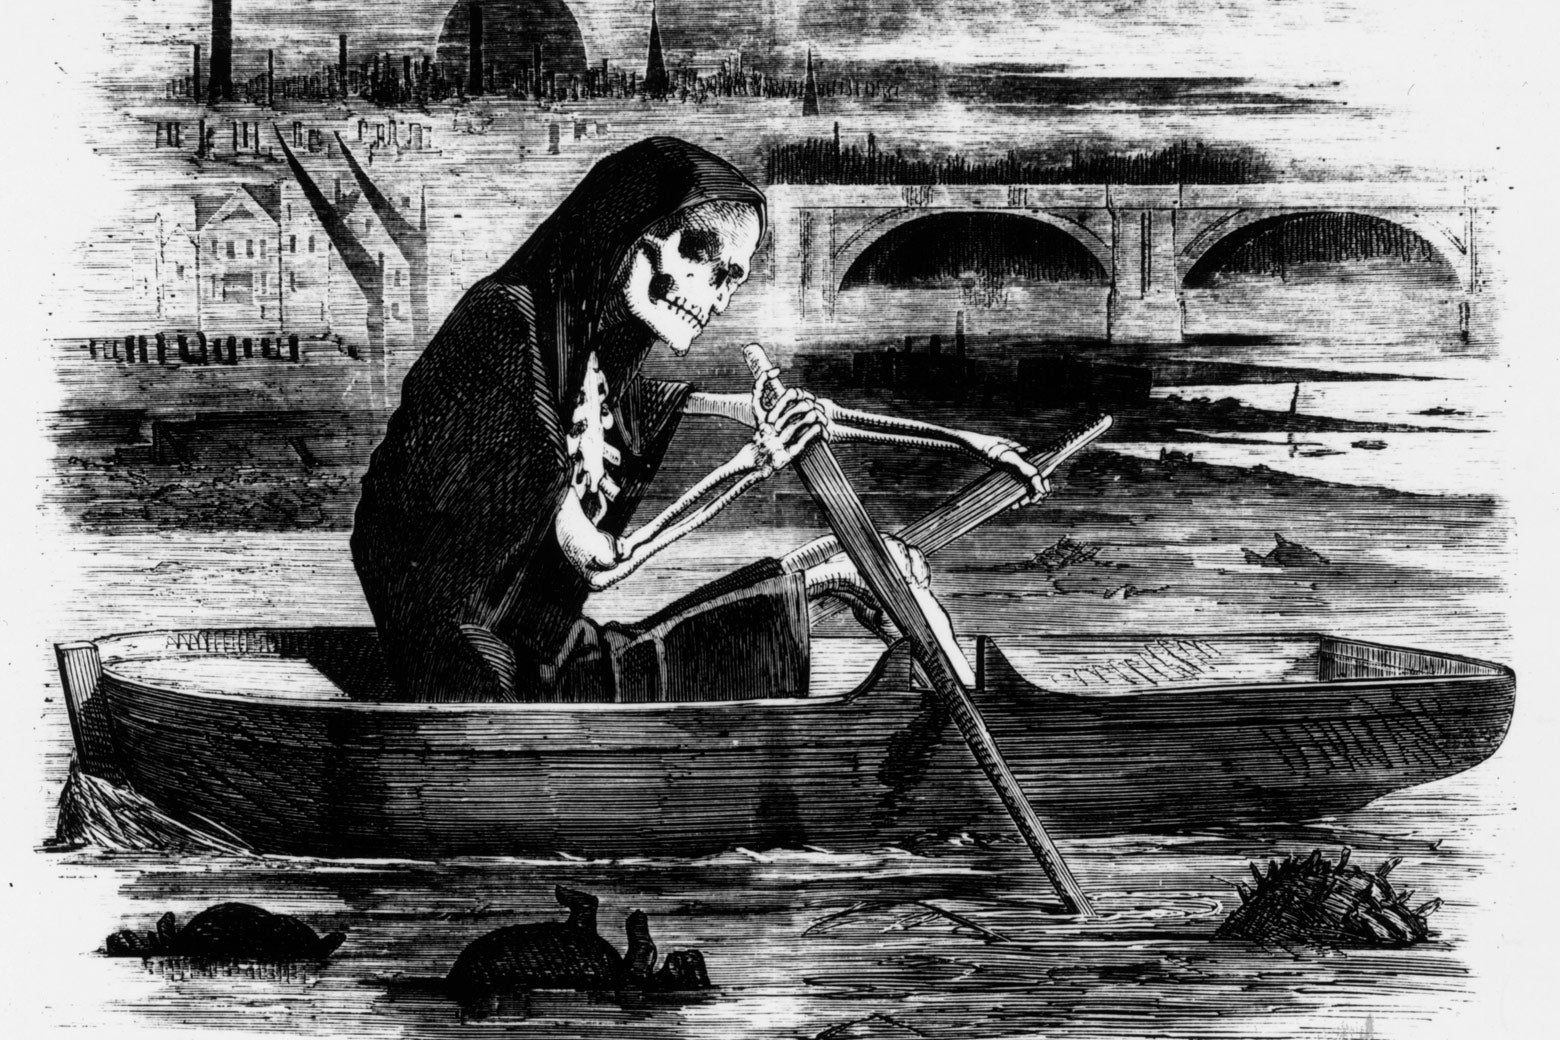 A black-and-white sketched cartoon from Punch magazine showing a skeleton rowing along the River Thames with London Bridge in the background